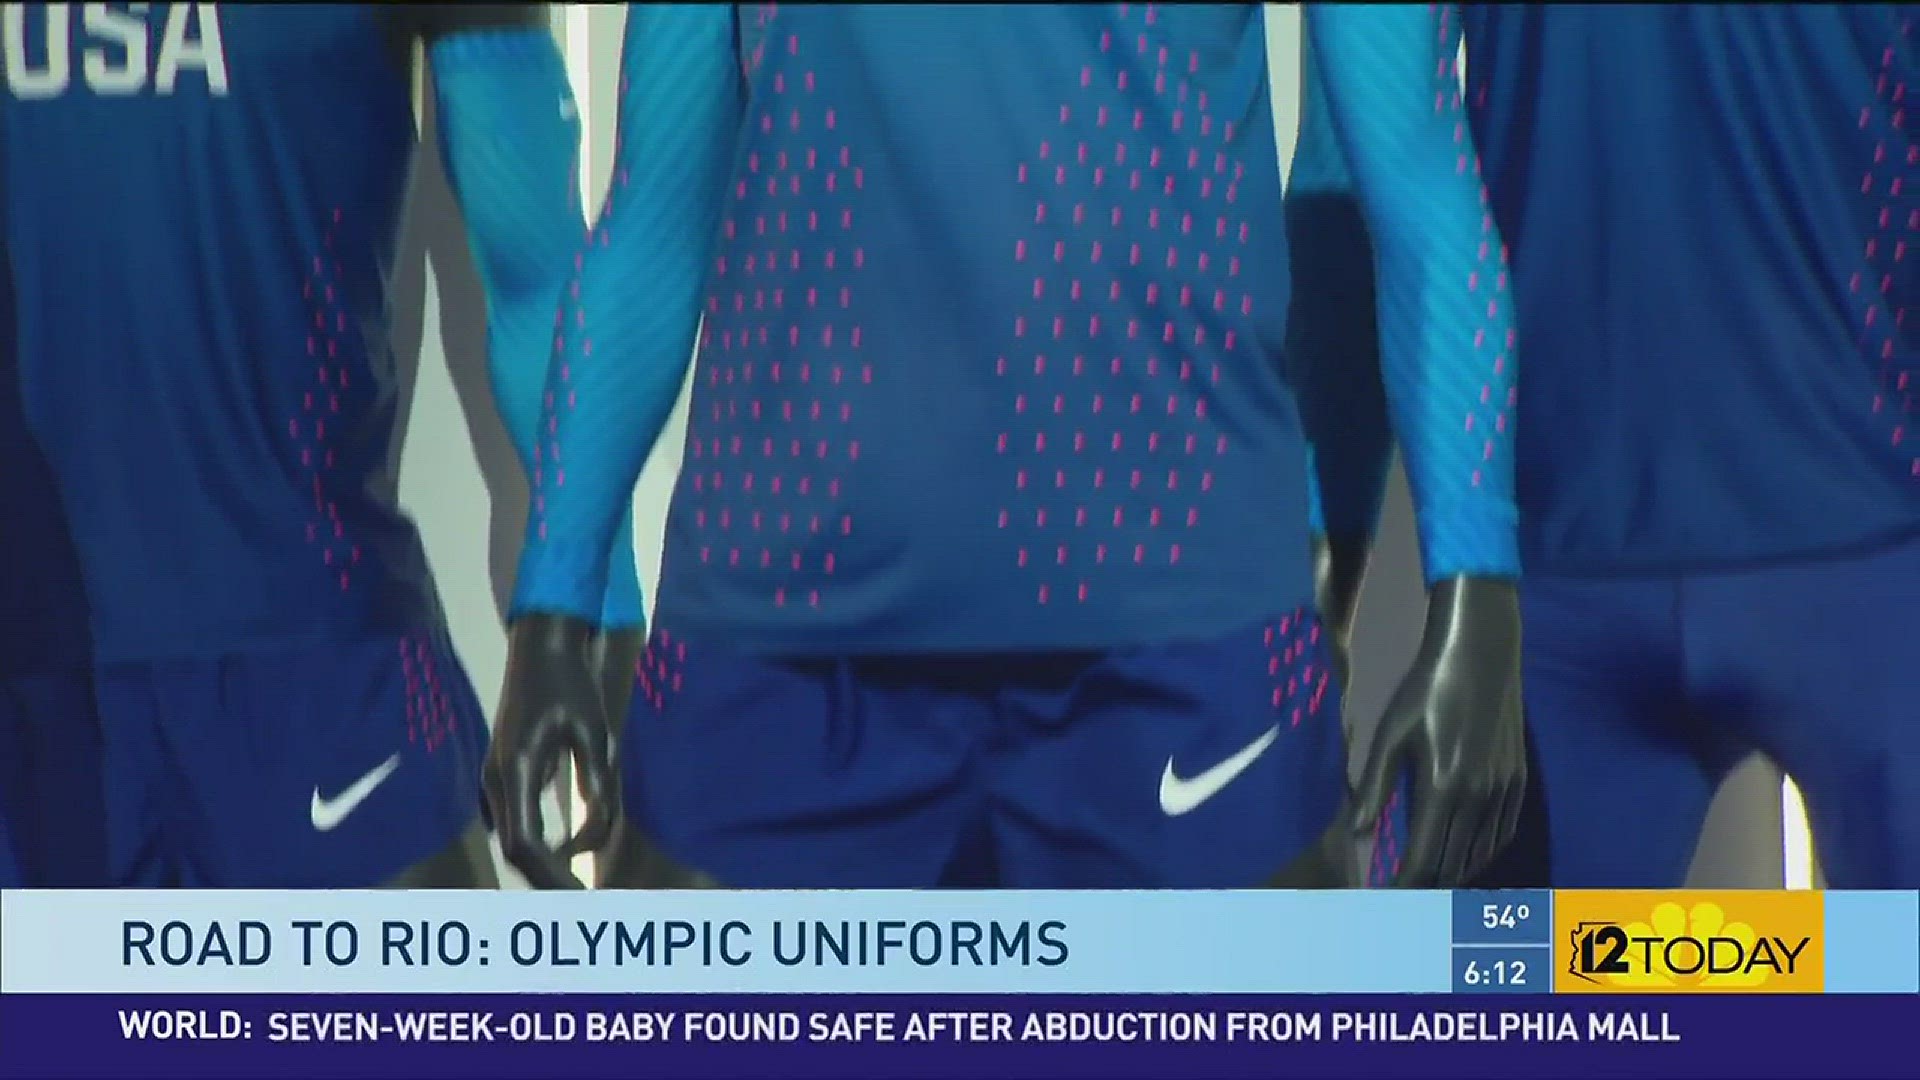 Nike has released its Olympic uniforms for the United States and other countries. April 1, 2016.